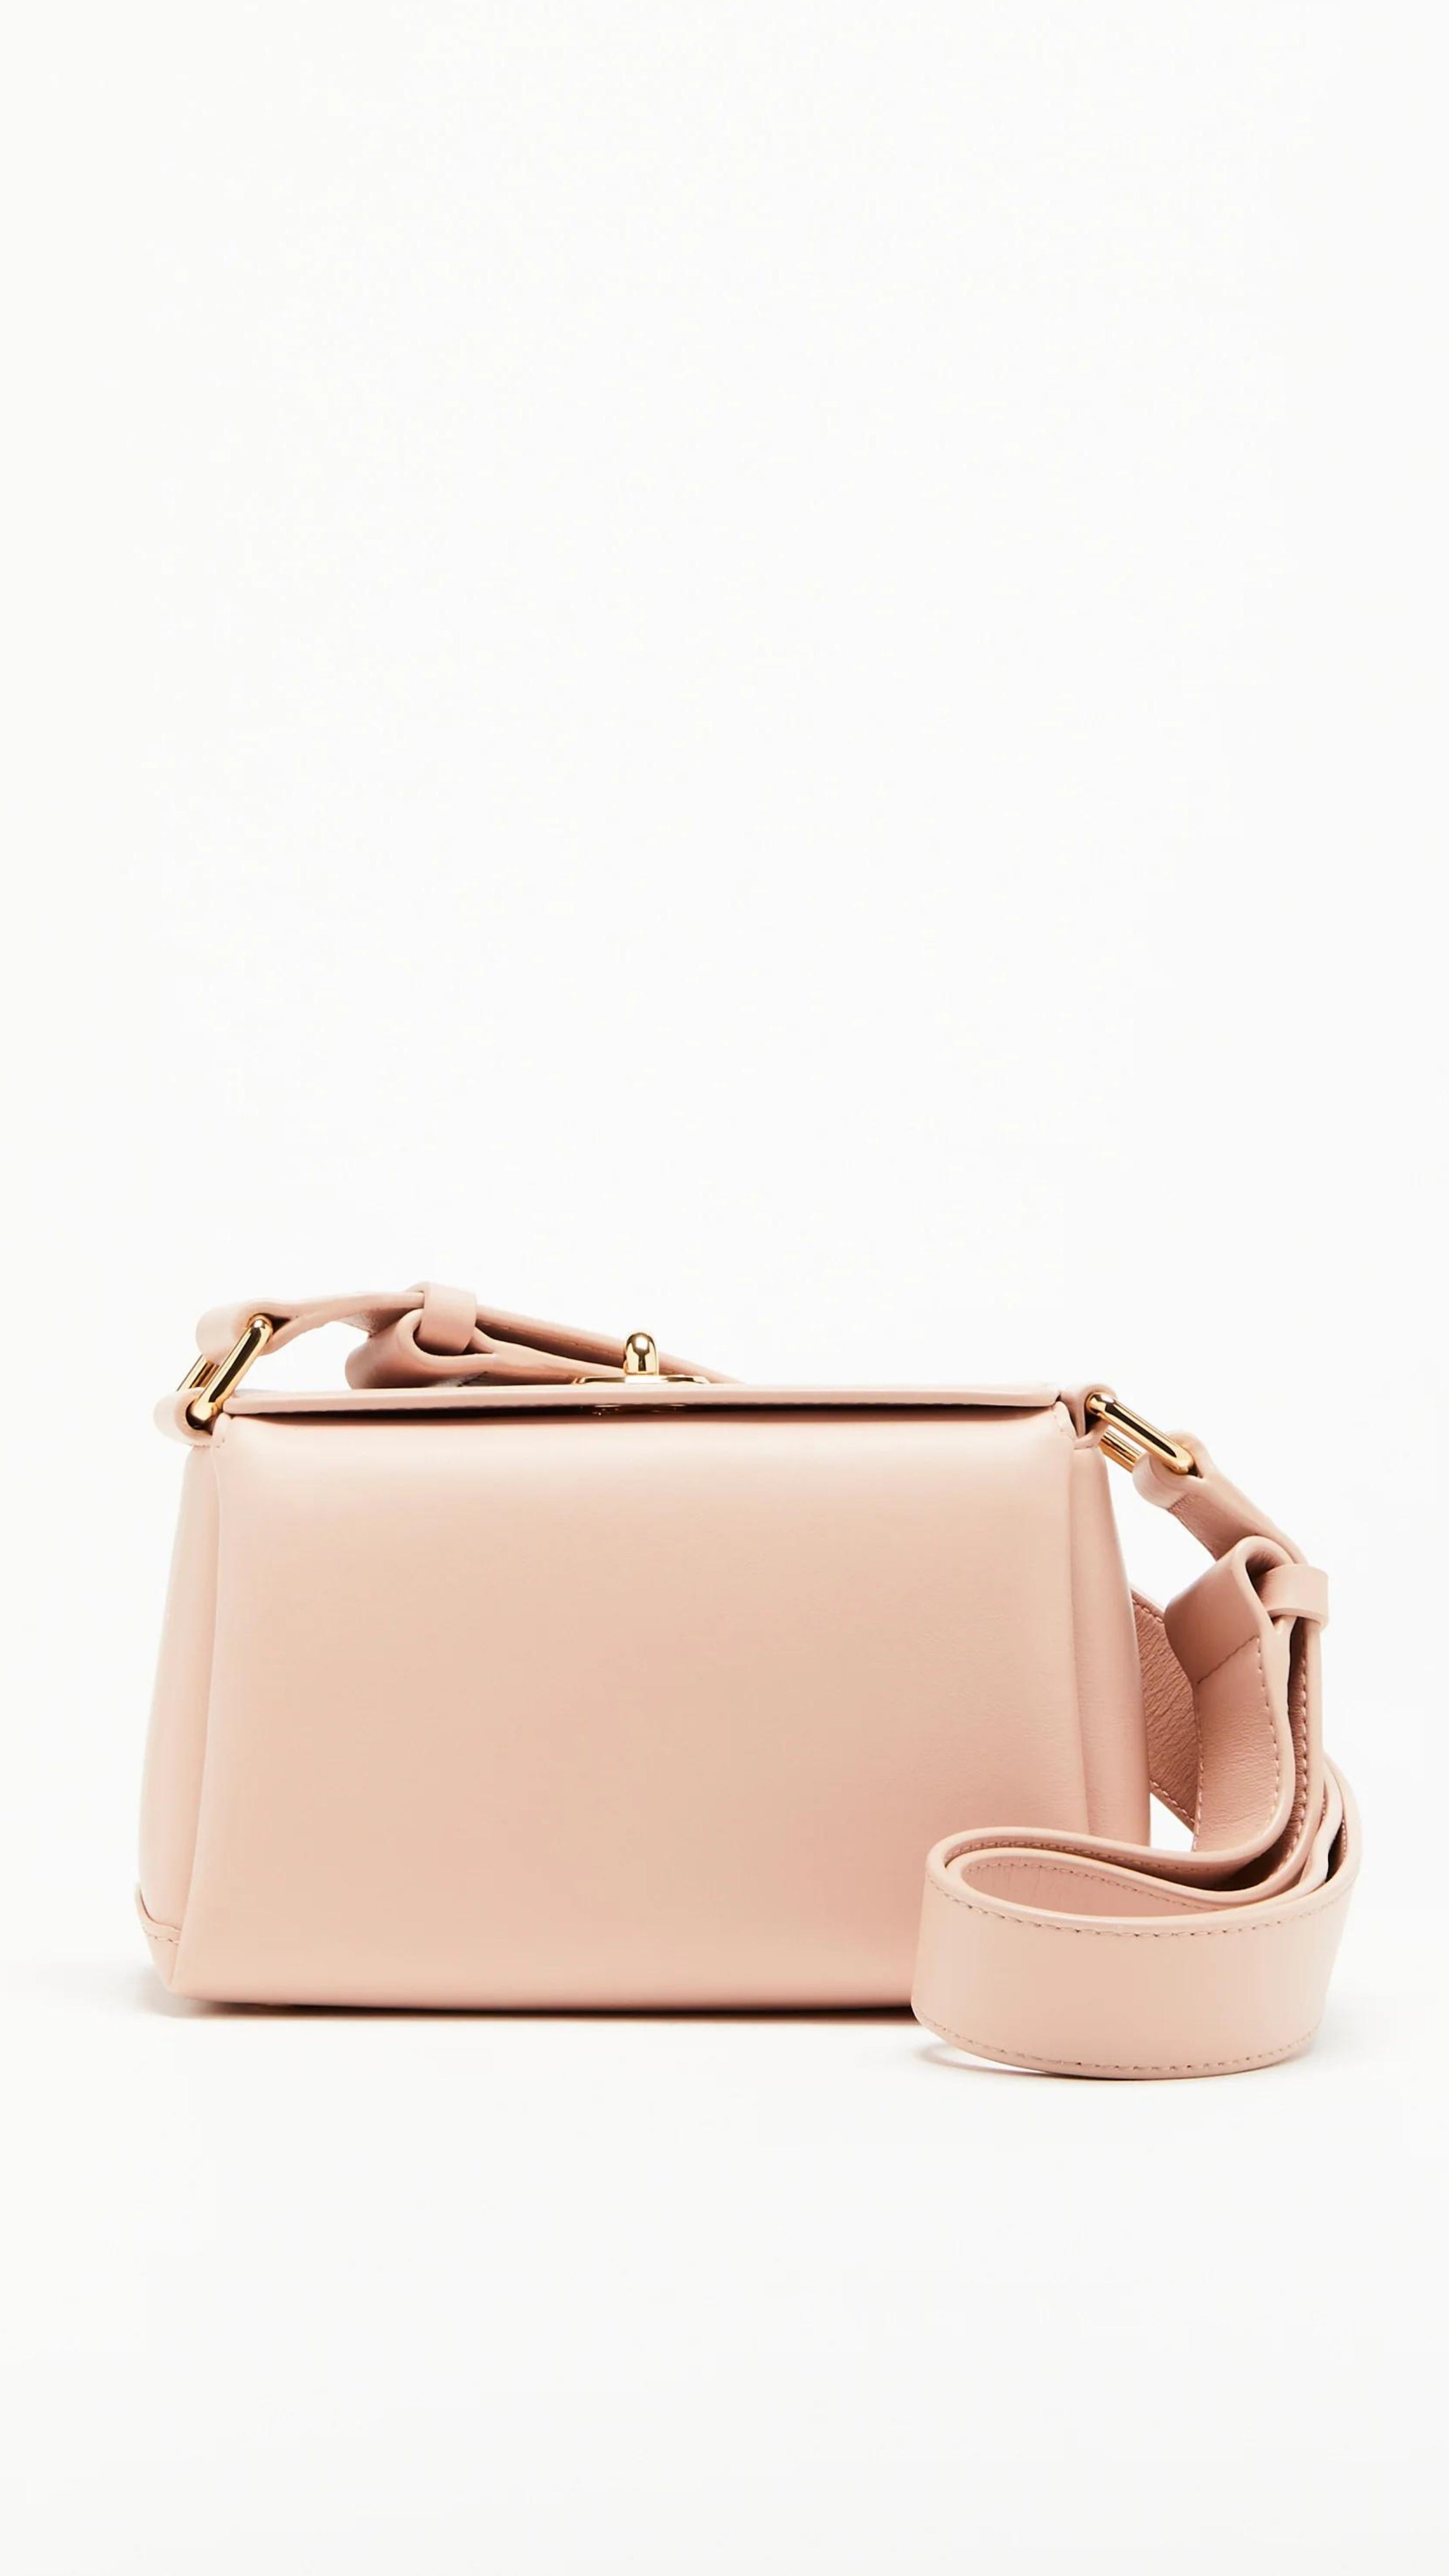 Plan C The Mini Folded Bag in Sand Pink. Luxury handbag crafted in Italy from soft calfskin with an adjustable leather shoulder strap. This purse has a gold-toned turnstile top closure and offers three compartments, one flat zipped and one snap buttoned pocket. Photo shown from the front view.